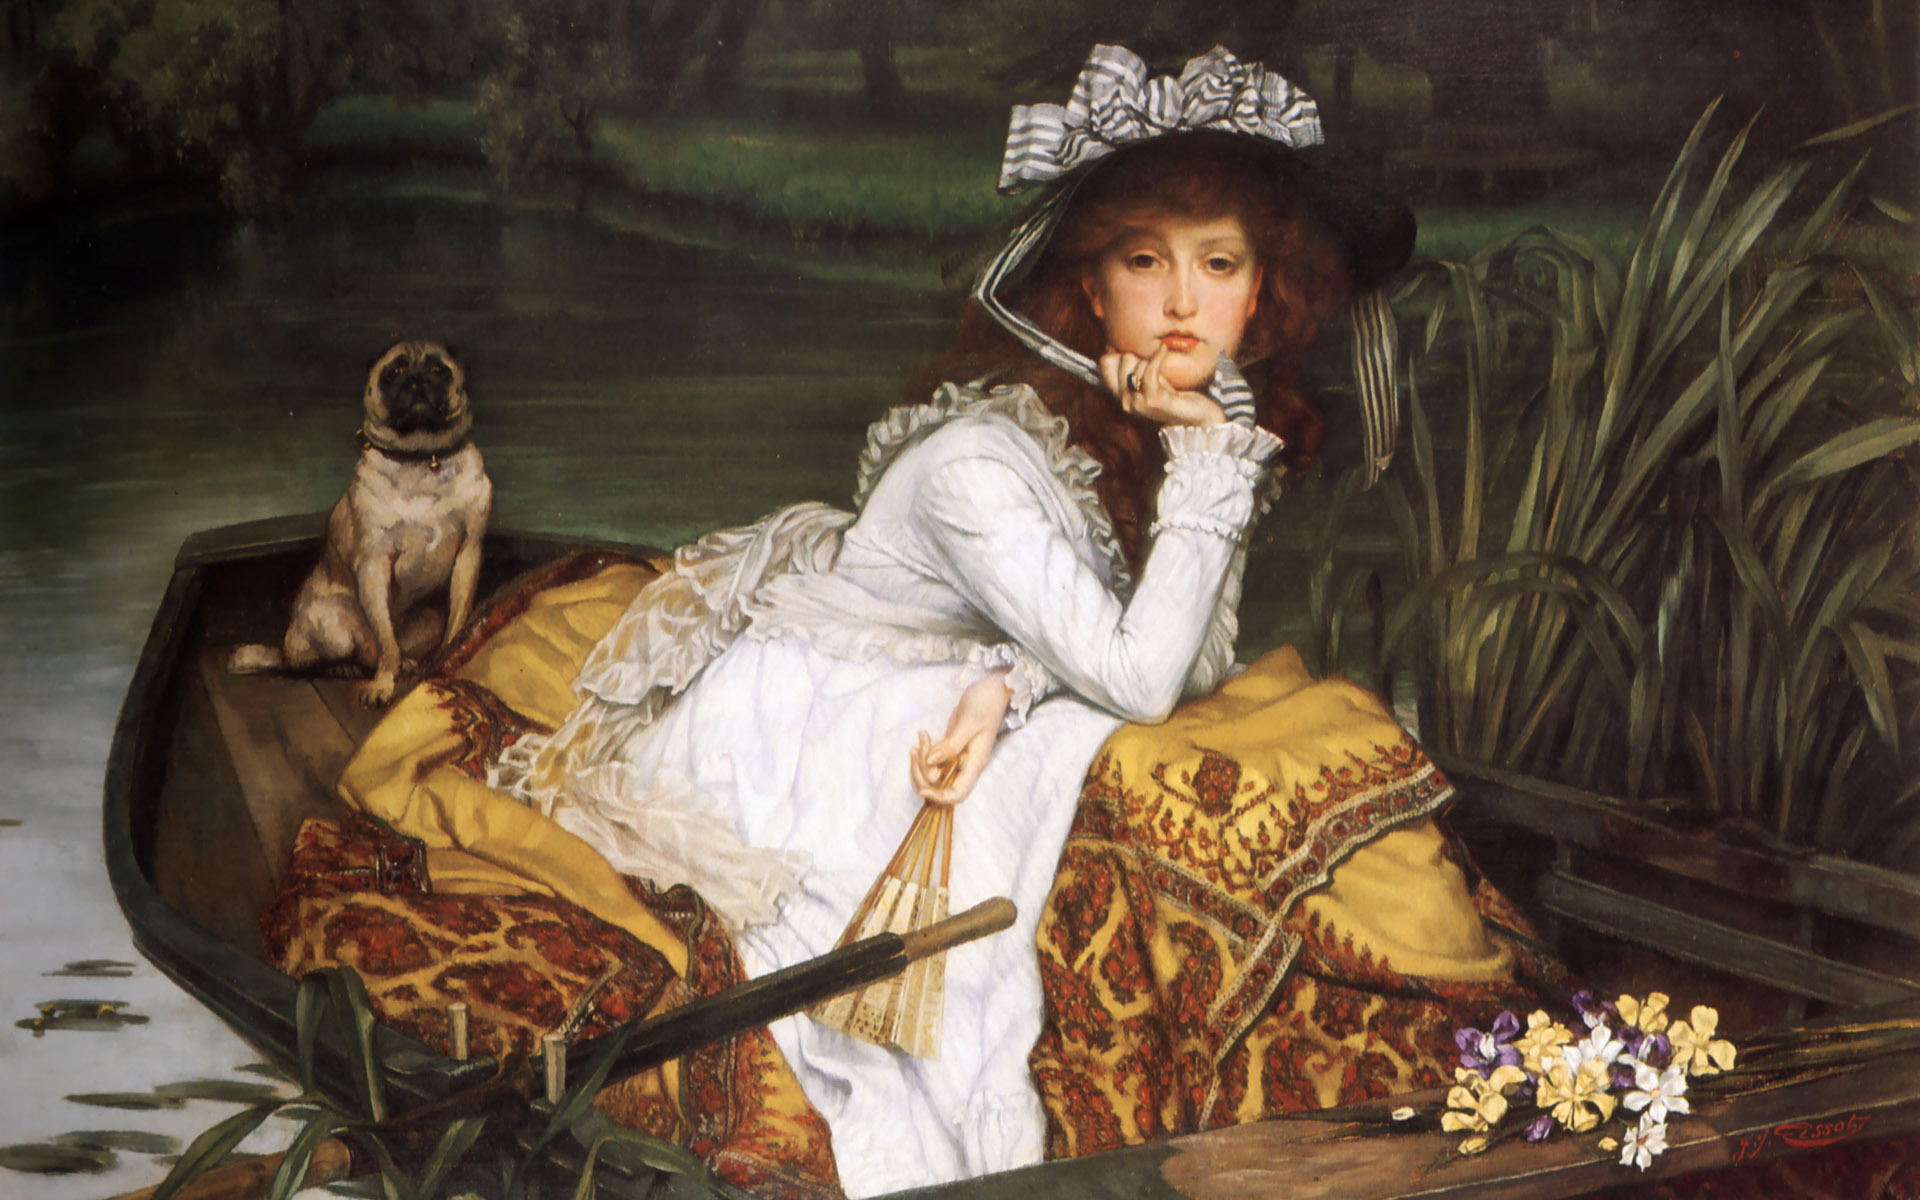 Wallpaper The Painting Girl Dog Boat Theme Miscellanea